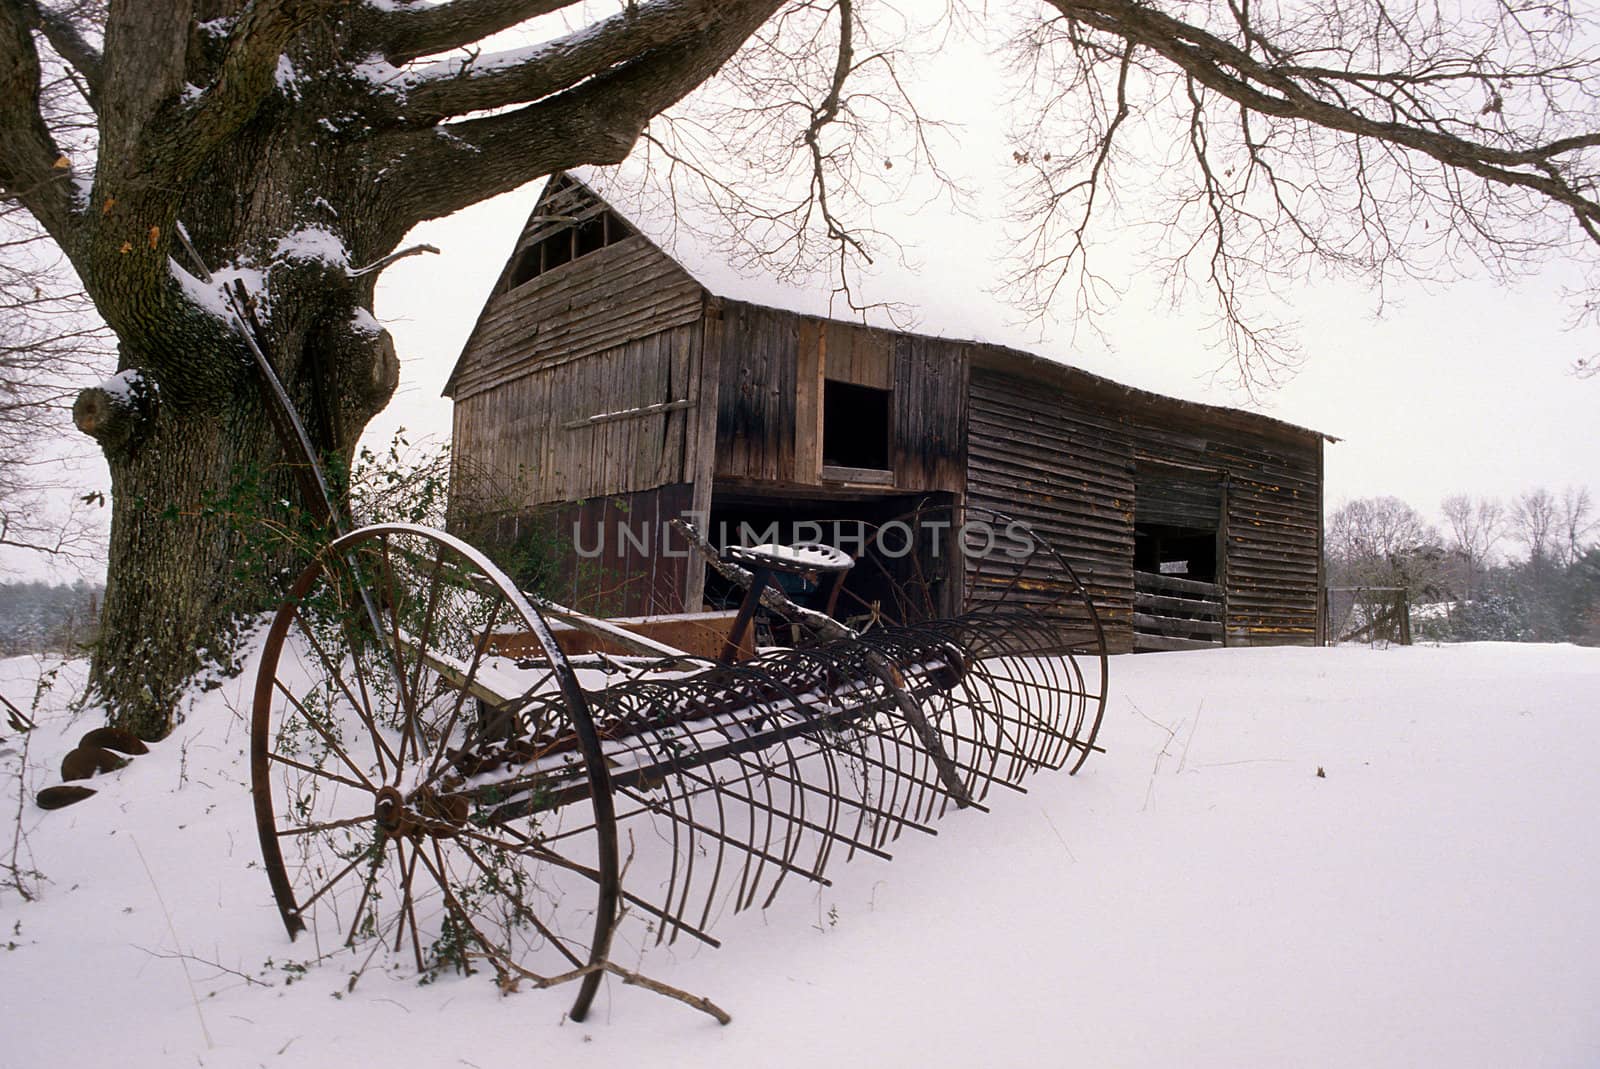 An old barn with farm equipment in the snow